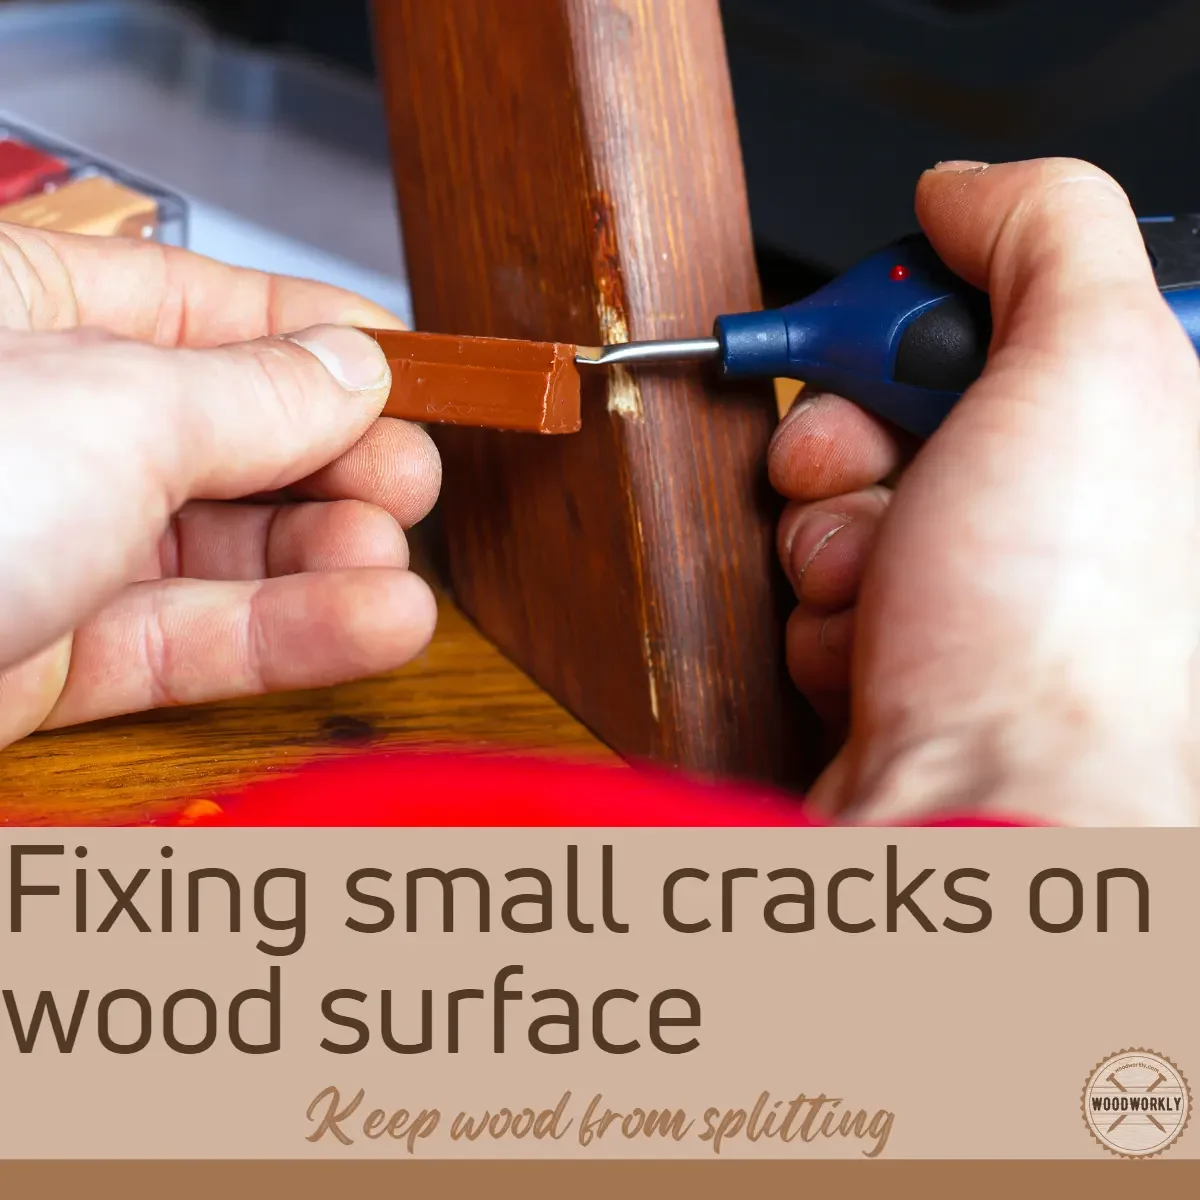 Fixing small cracks on wood surface